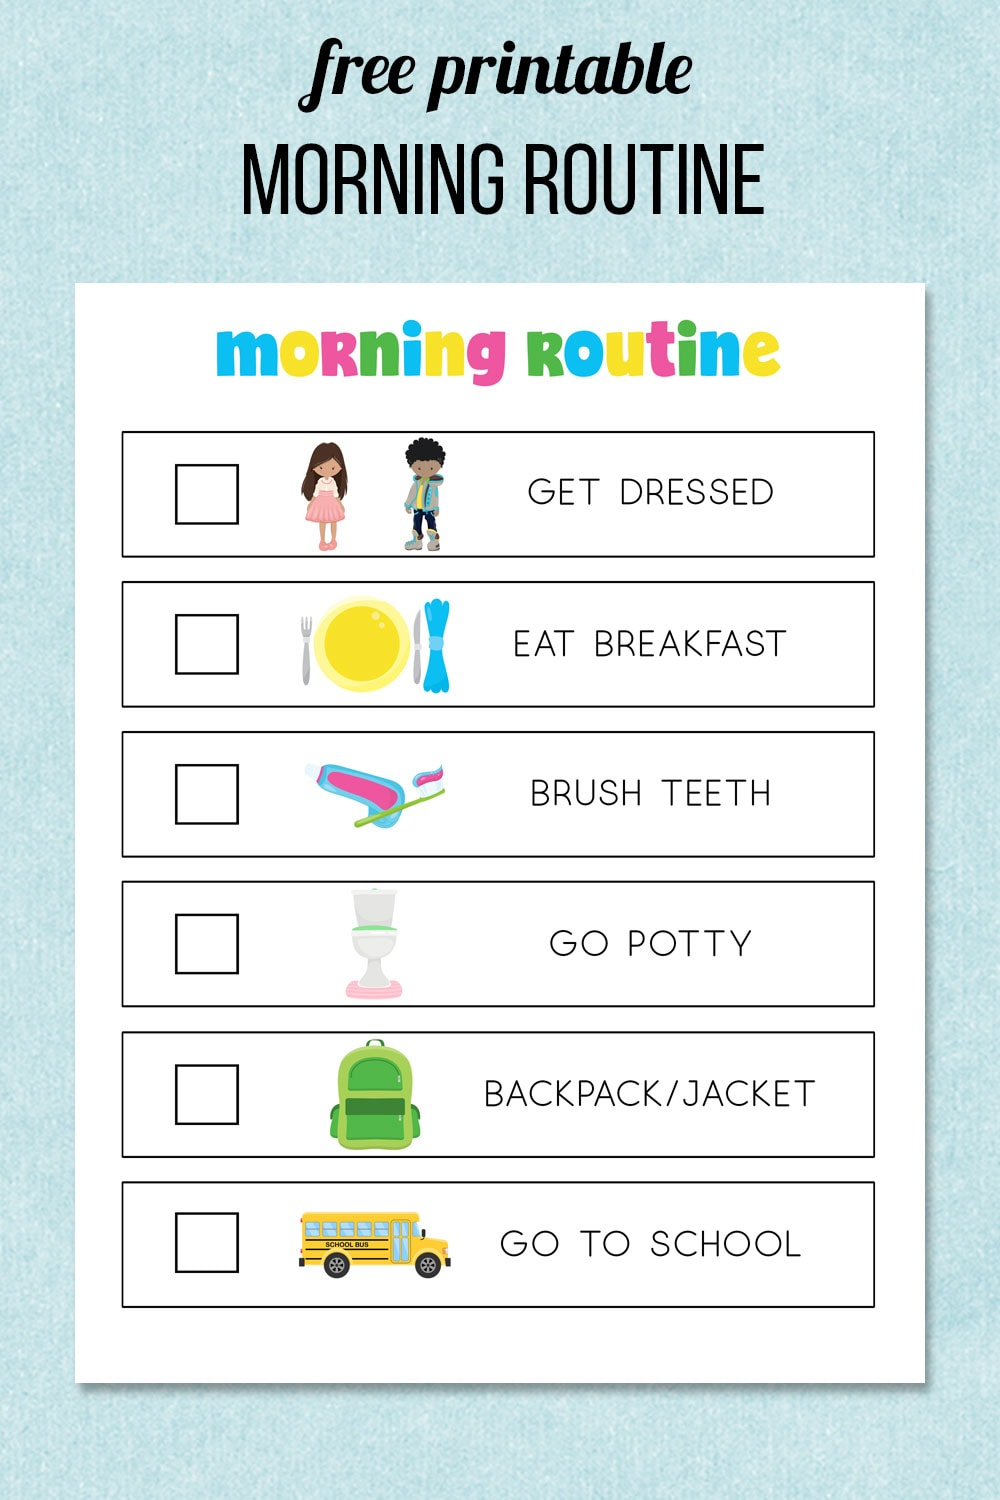 Morning Routine Printable in Free Printable Morning Routine Charts With Pictures